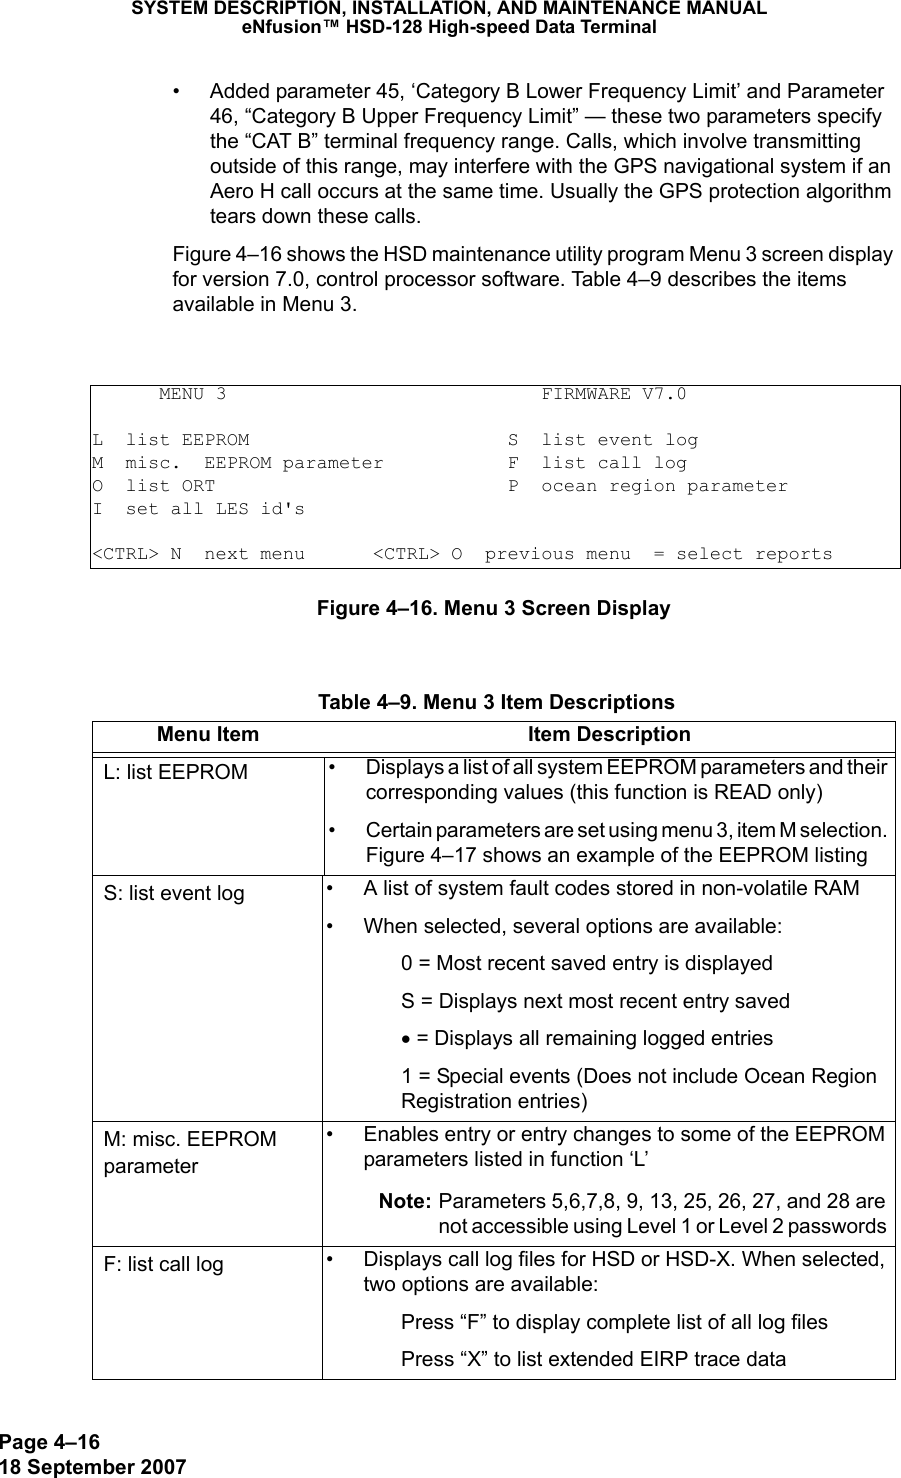 Page 4–1618 September 2007SYSTEM DESCRIPTION, INSTALLATION, AND MAINTENANCE MANUALeNfusion™ HSD-128 High-speed Data Terminal• Added parameter 45, ‘Category B Lower Frequency Limit’ and Parameter 46, “Category B Upper Frequency Limit” — these two parameters specify the “CAT B” terminal frequency range. Calls, which involve transmitting outside of this range, may interfere with the GPS navigational system if an Aero H call occurs at the same time. Usually the GPS protection algorithm tears down these calls.Figure 4–16 shows the HSD maintenance utility program Menu 3 screen display for version 7.0, control processor software. Table 4–9 describes the items available in Menu 3.Figure 4–16. Menu 3 Screen Display      MENU 3                            FIRMWARE V7.0L  list EEPROM                       S  list event logM  misc.  EEPROM parameter           F  list call logO  list ORT                          P  ocean region parameterI  set all LES id&apos;s&lt;CTRL&gt; N  next menu      &lt;CTRL&gt; O  previous menu  = select reports Table 4–9. Menu 3 Item DescriptionsMenu Item Item DescriptionL: list EEPROM • Displays a list of all system EEPROM parameters and their corresponding values (this function is READ only)• Certain parameters are set using menu 3, item M selection.  Figure 4–17 shows an example of the EEPROM listingS: list event log • A list of system fault codes stored in non-volatile RAM• When selected, several options are available:0 = Most recent saved entry is displayedS = Displays next most recent entry saved• = Displays all remaining logged entries1 = Special events (Does not include Ocean Region Registration entries)M: misc. EEPROM parameter• Enables entry or entry changes to some of the EEPROM parameters listed in function ‘L’Note: Parameters 5,6,7,8, 9, 13, 25, 26, 27, and 28 are not accessible using Level 1 or Level 2 passwords F: list call log • Displays call log files for HSD or HSD-X. When selected, two options are available:Press “F” to display complete list of all log files Press “X” to list extended EIRP trace data